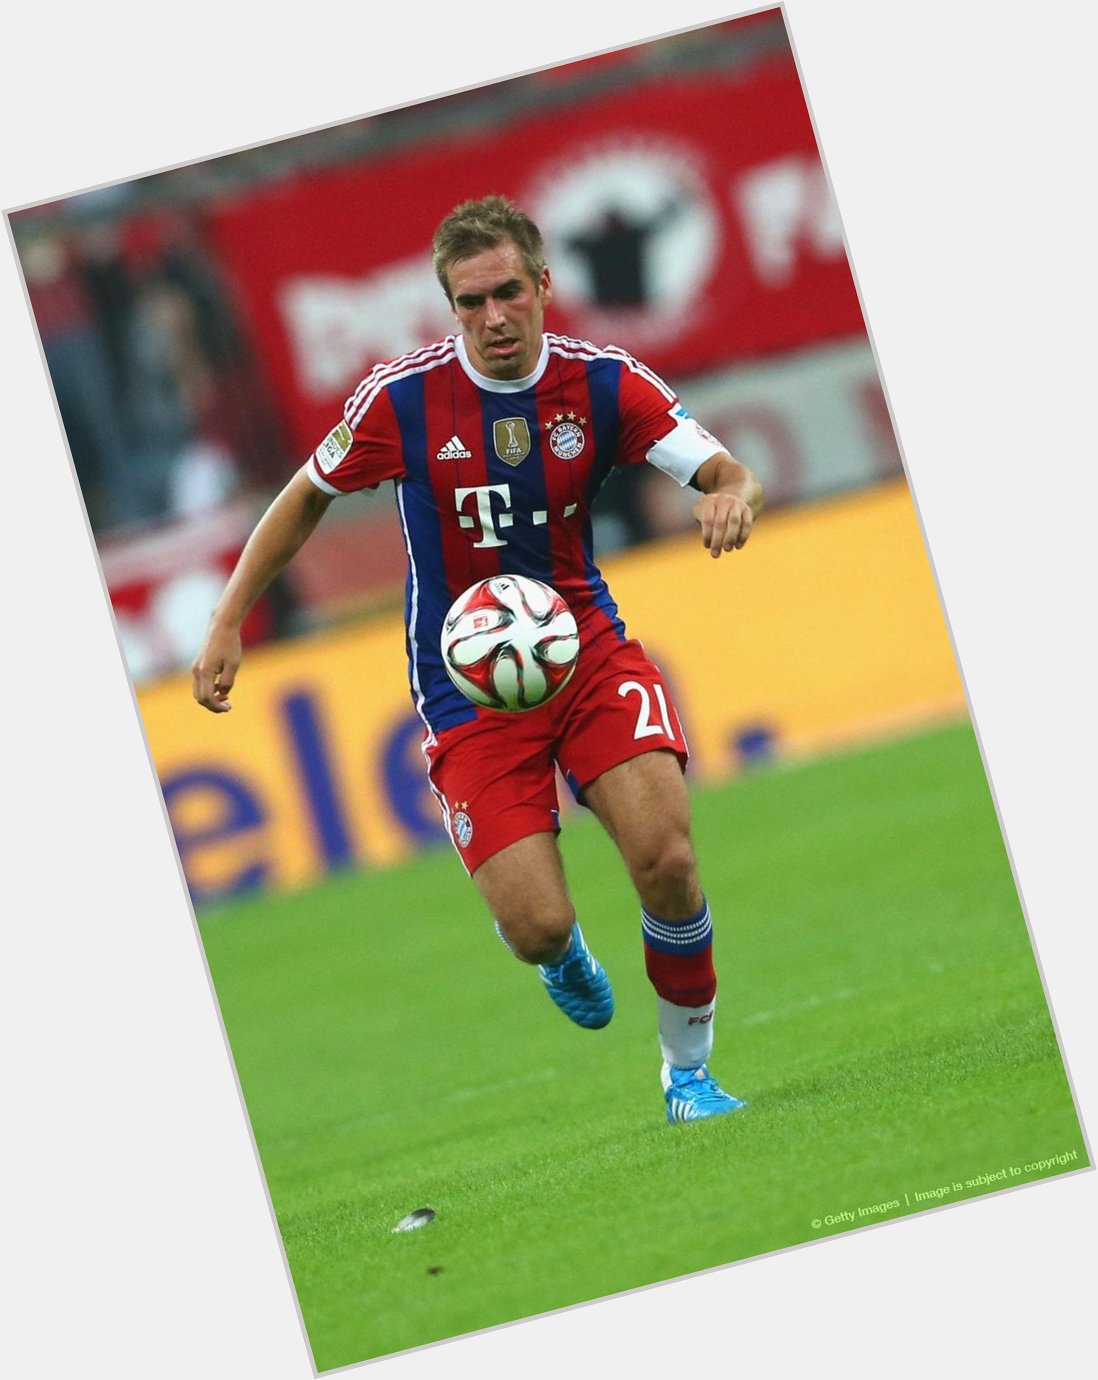 Happy birthday Philipp Lahm. 
The best captain in the world.
Hope Lahm have a amazing day. 